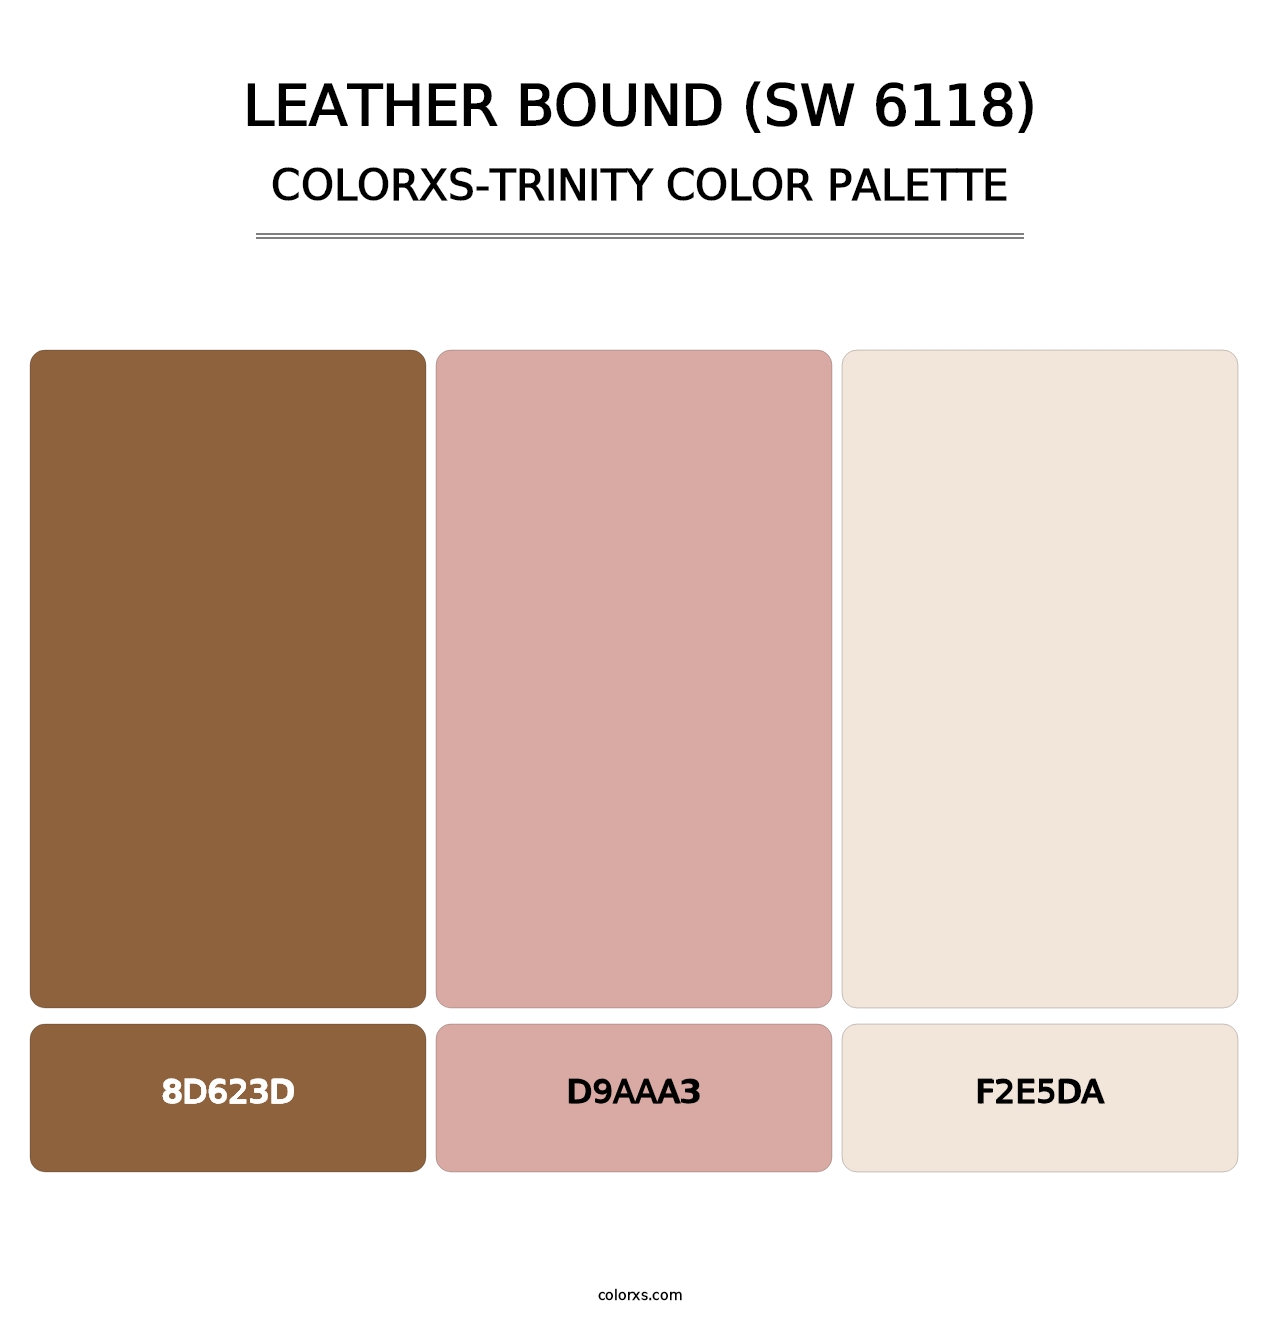 Leather Bound (SW 6118) - Colorxs Trinity Palette